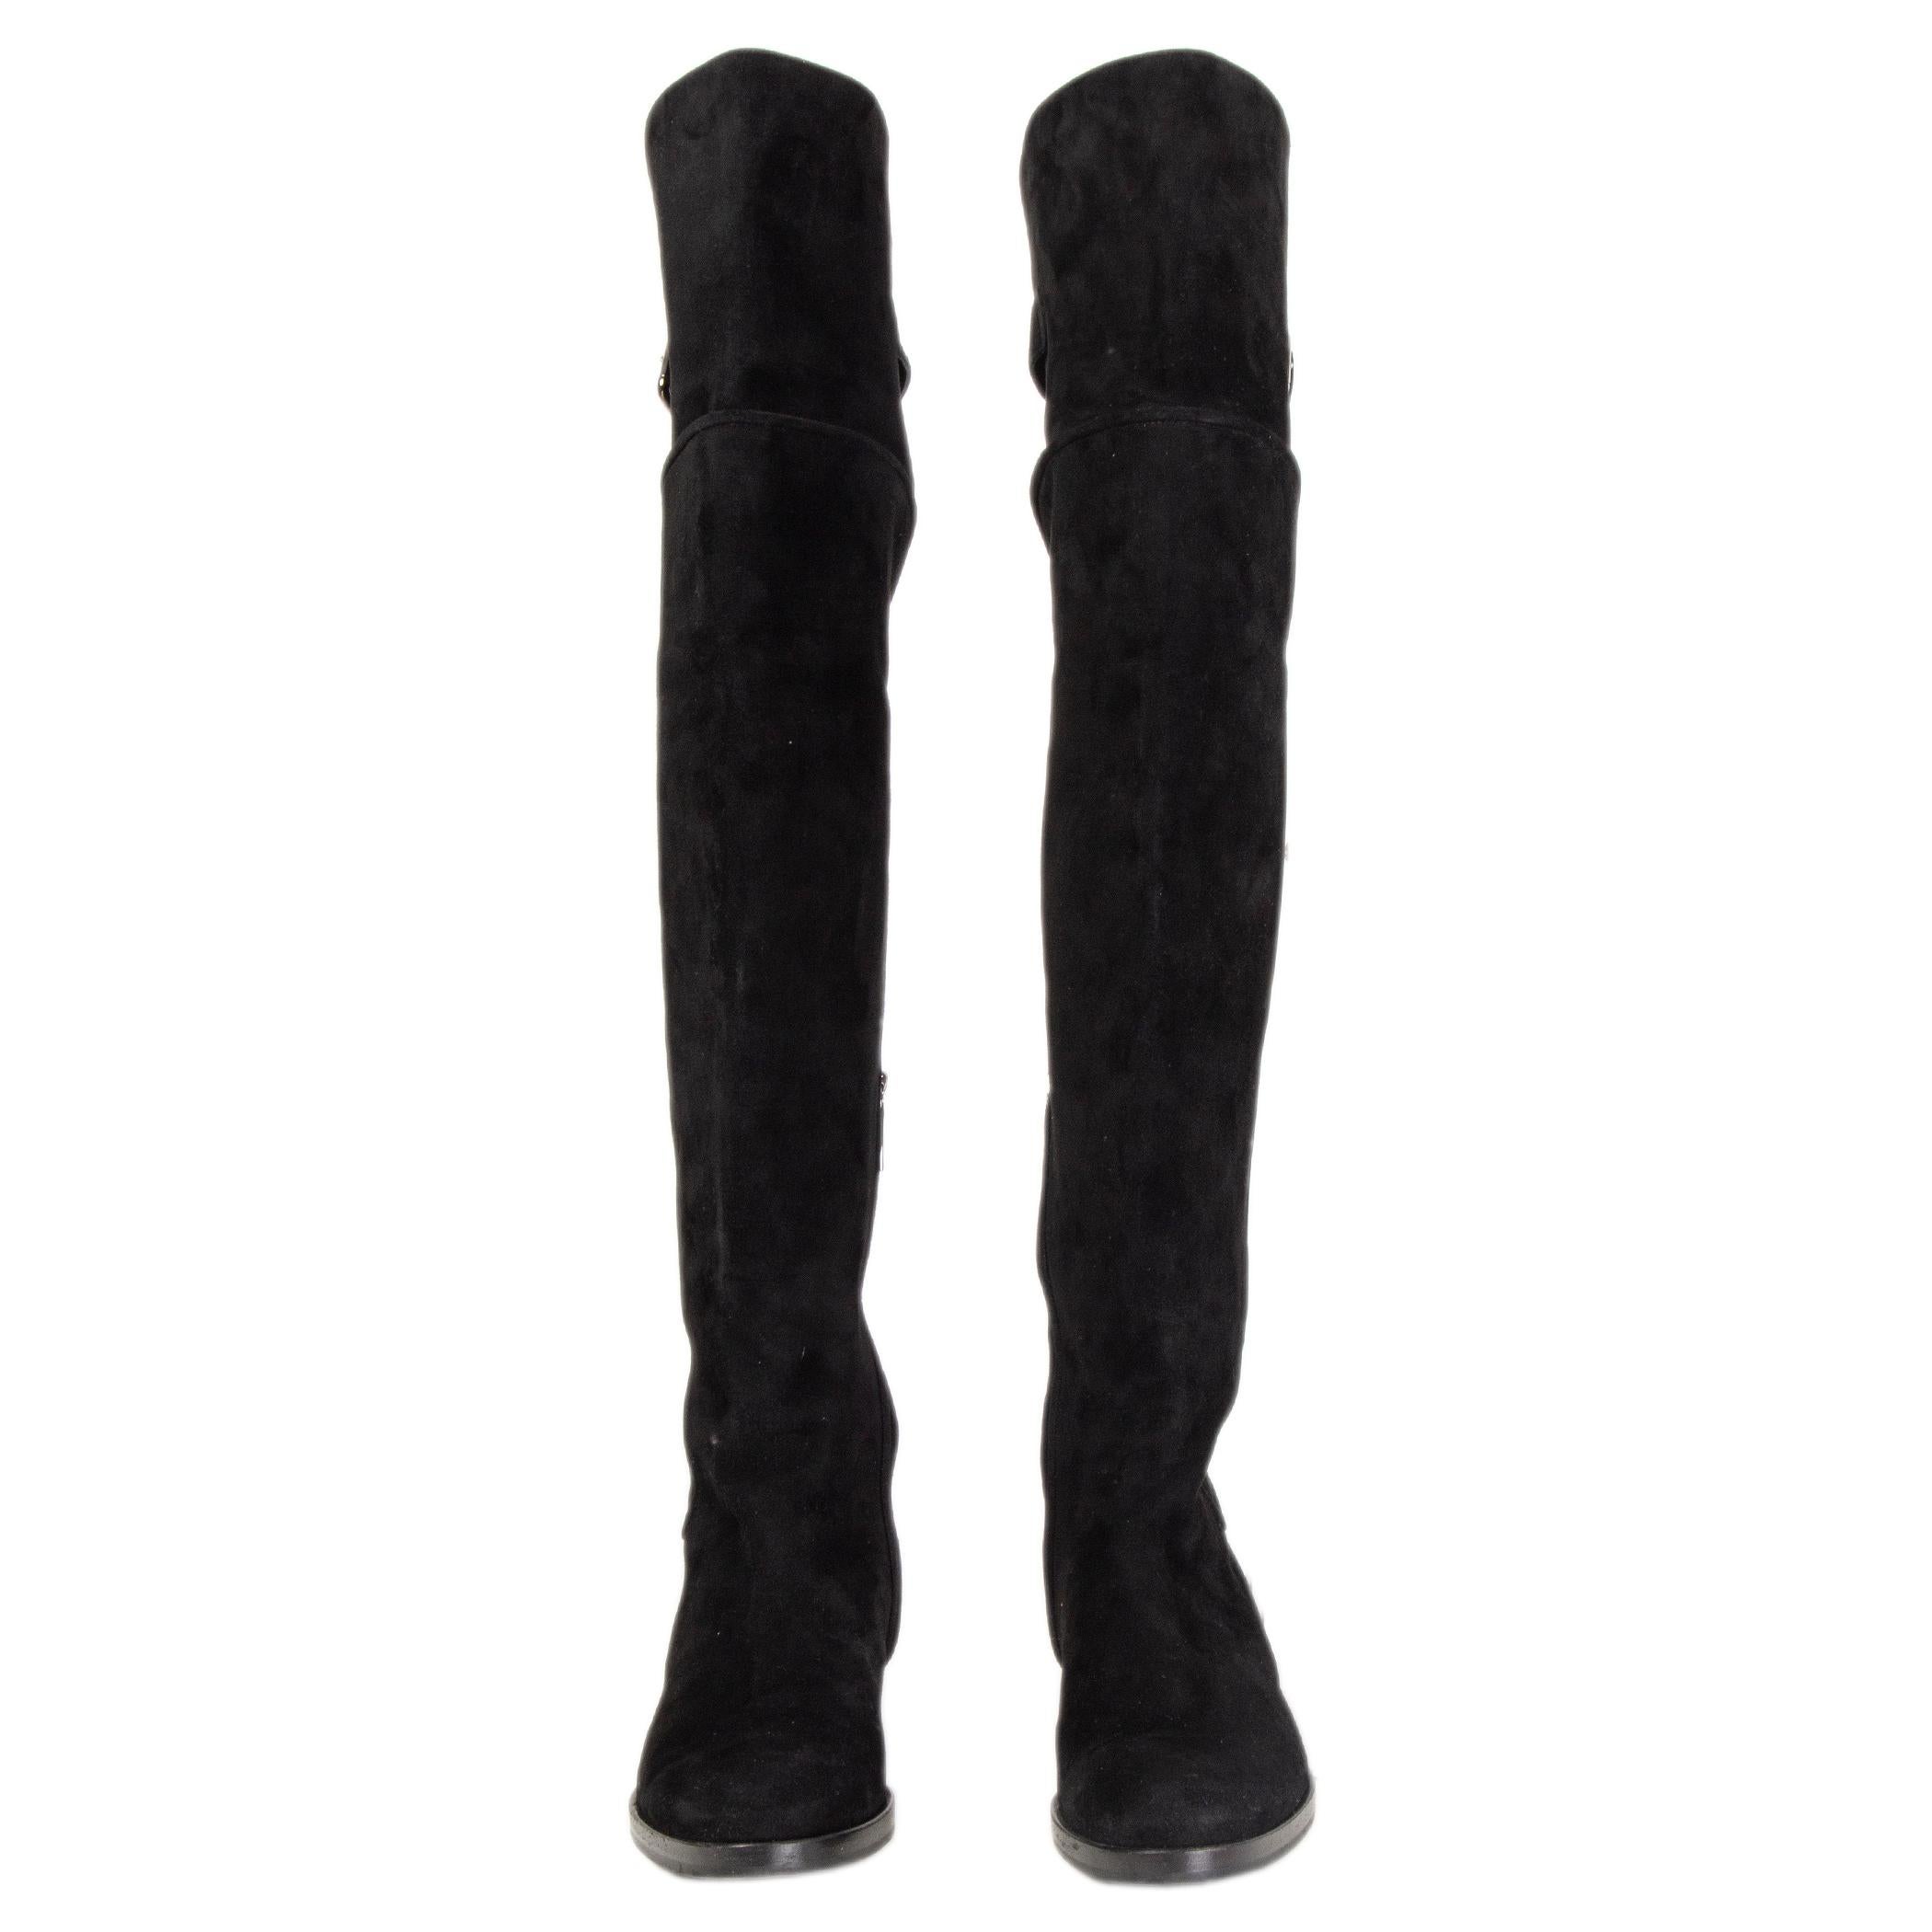 100% authentic Dolce & Gabbana over-knee boots in black suede with buckle fatening on the back. Open with a zipper among the inside. Have been worn and are in excellent condition. 

Measurements
Imprinted Size	38
Shoe Size	38
Inside Sole	25cm